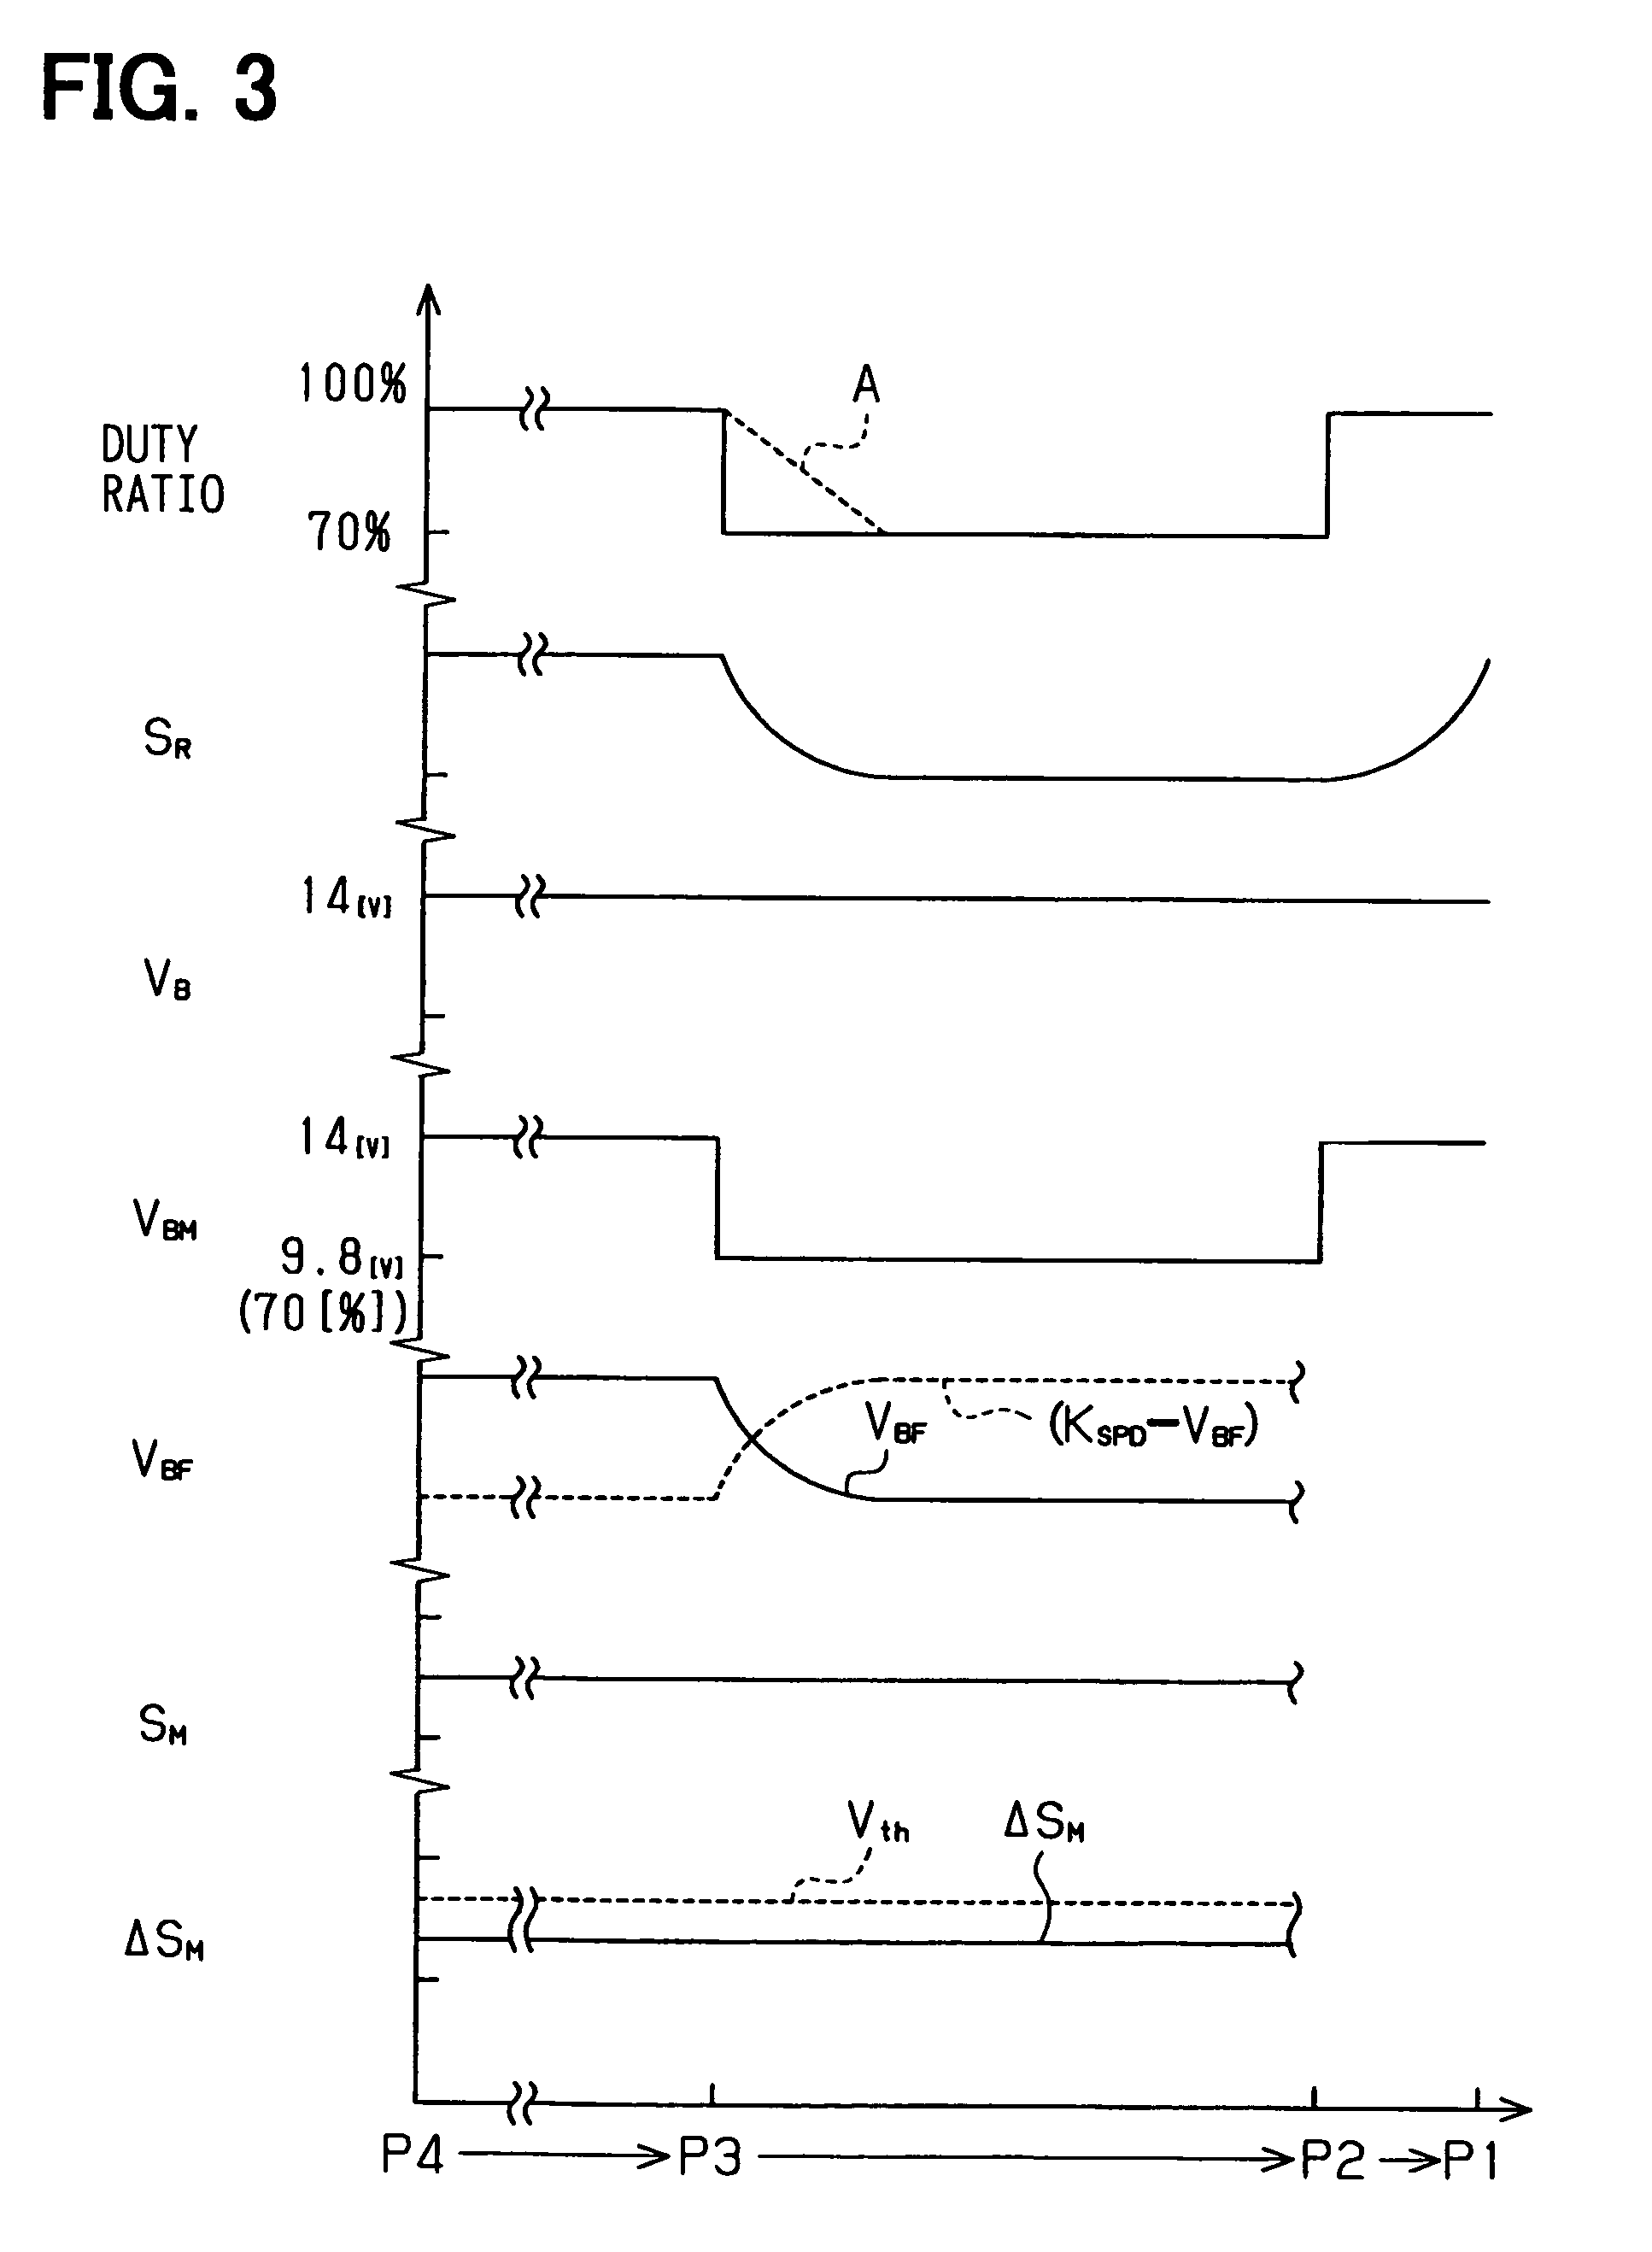 Open-and-close control system for openable apparatus